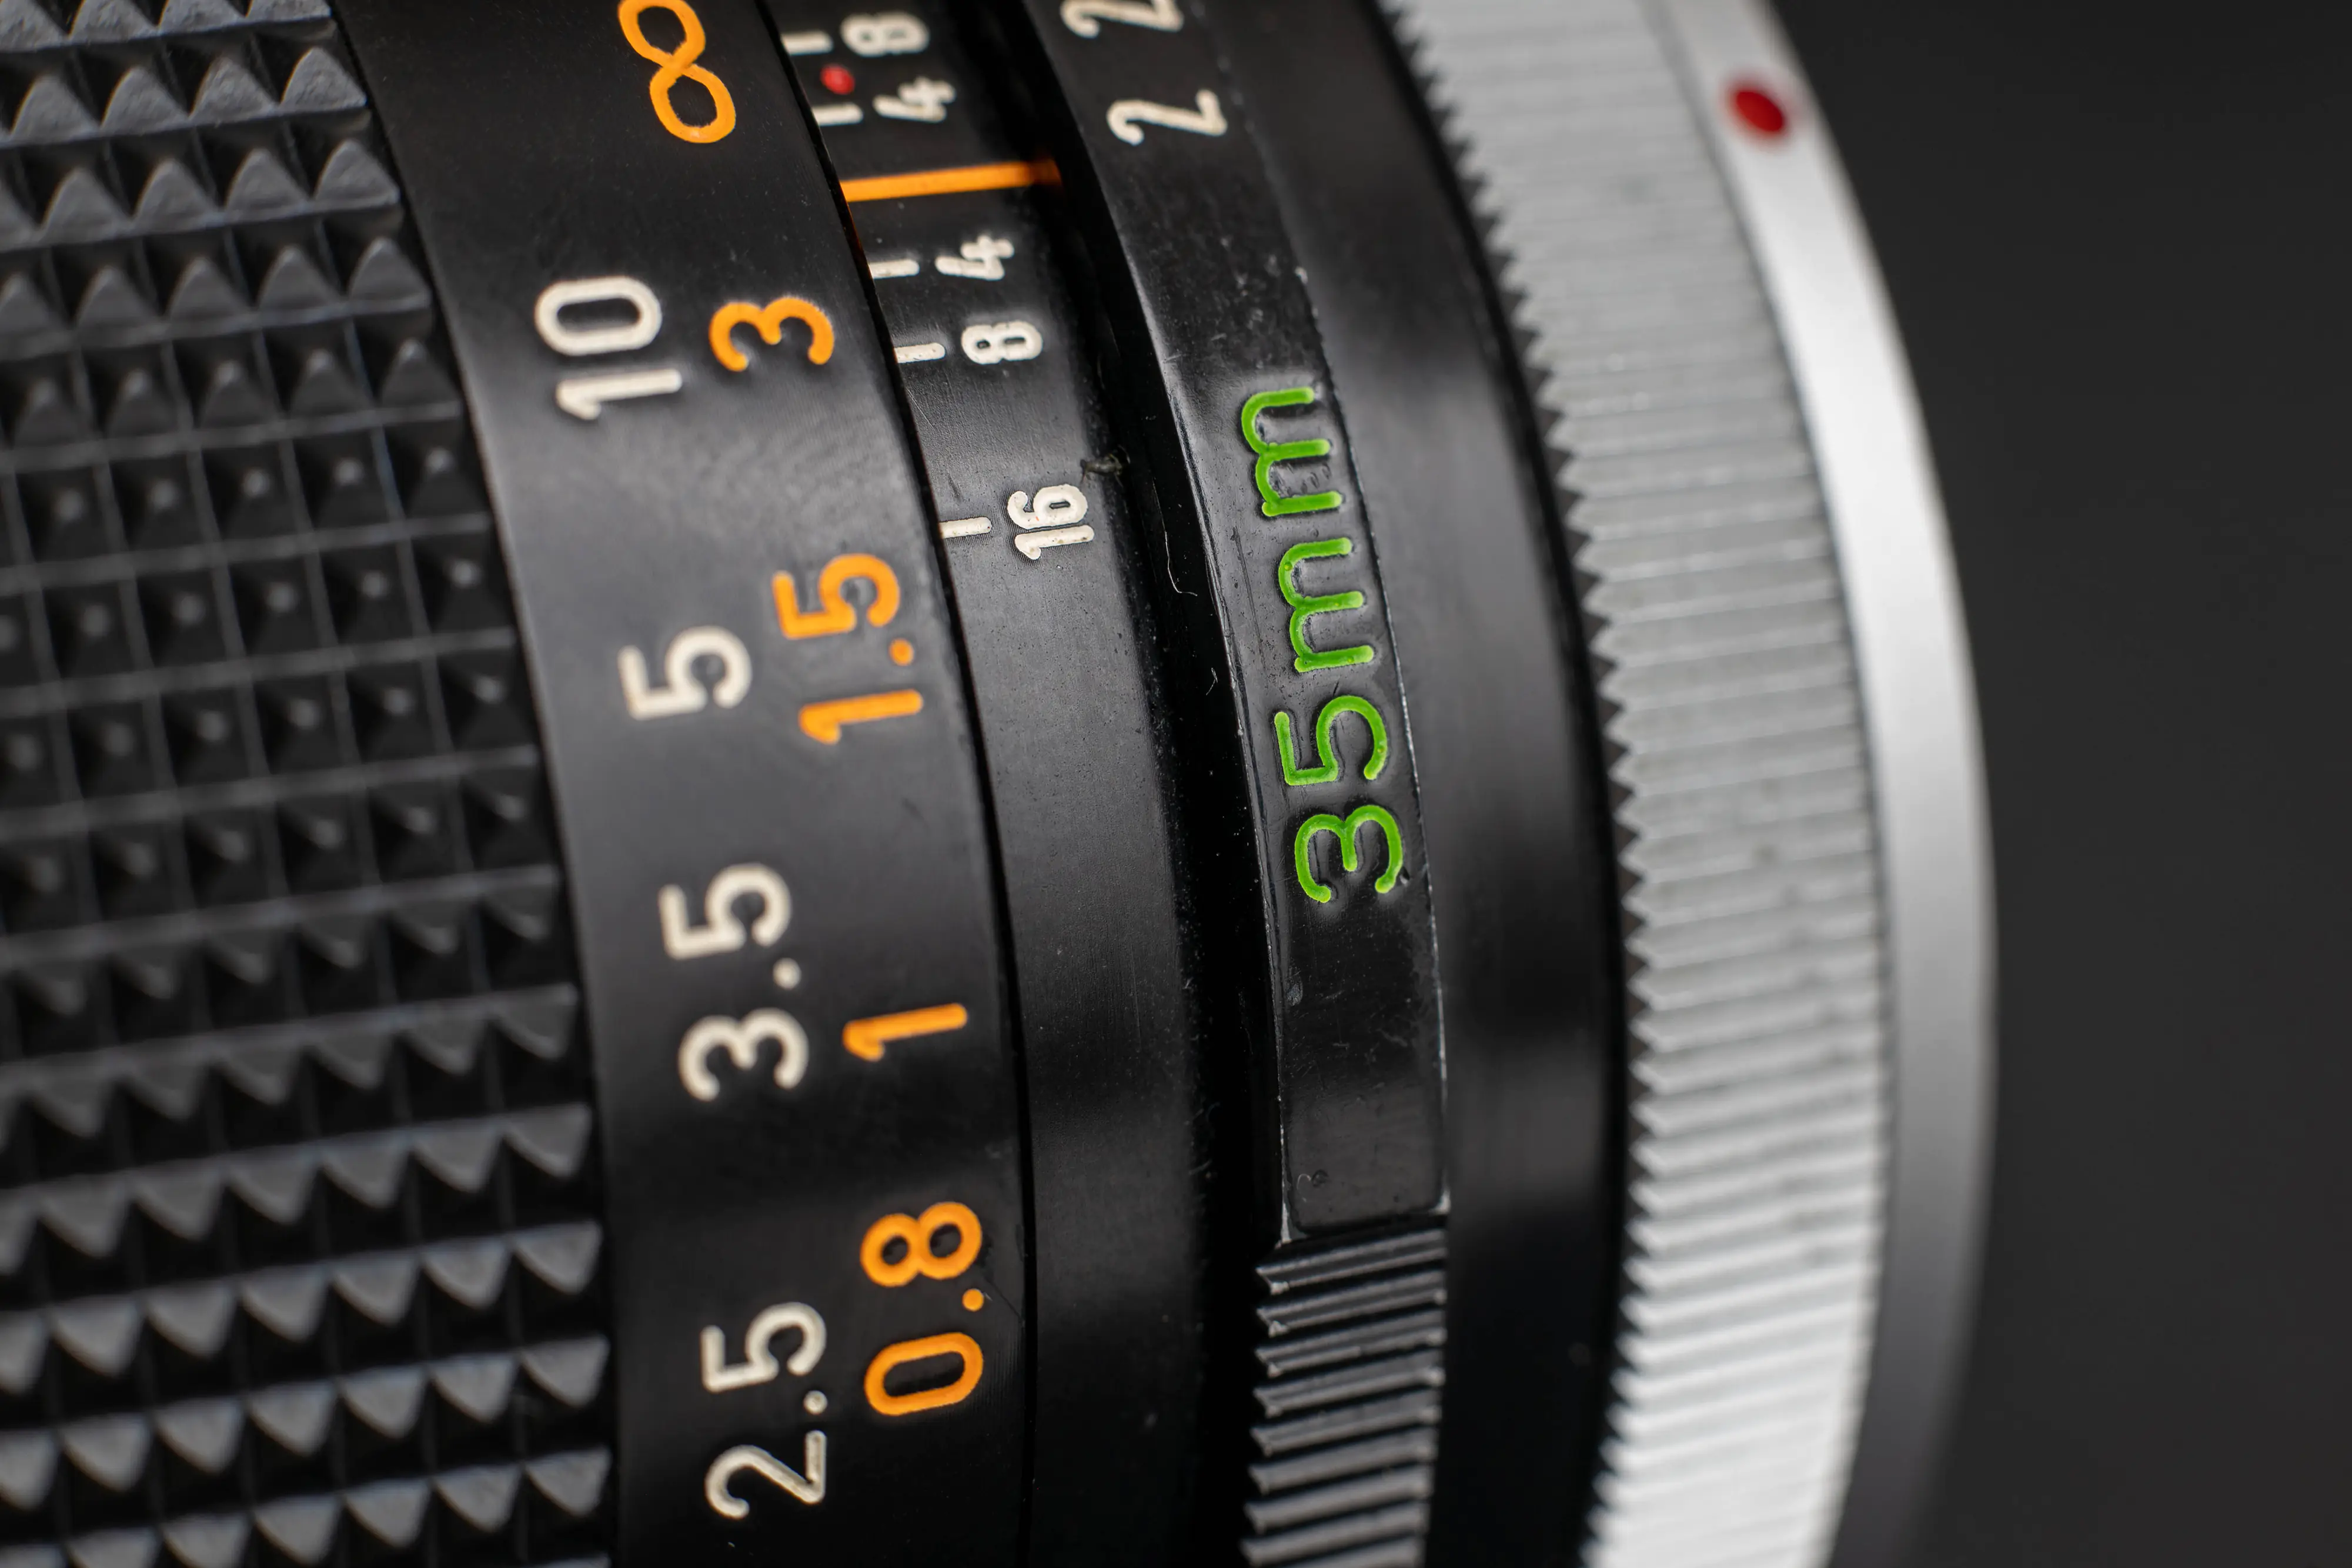 The attention to detail on the Canon FD 35mm f2 lens - the engravings are all in the metal, and just perfect.